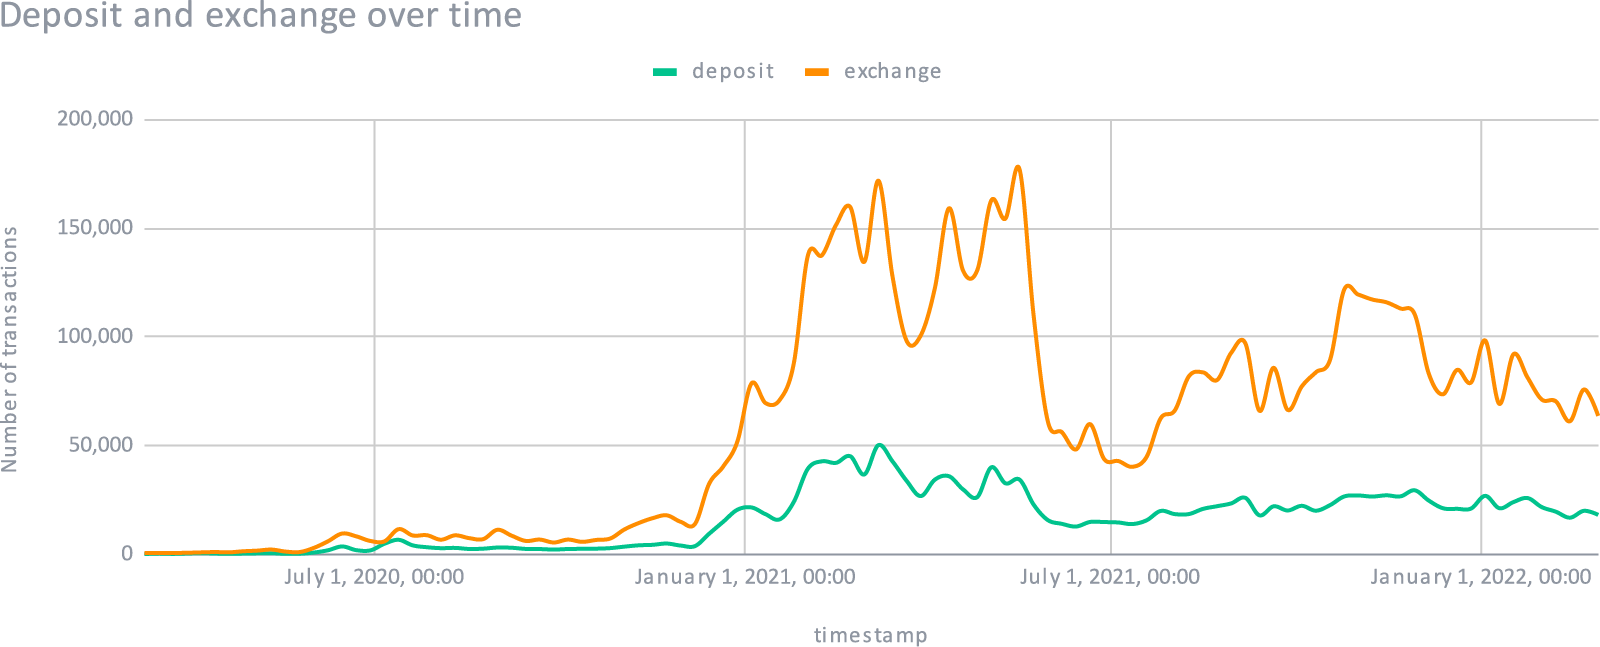 Deposit and exchange over time